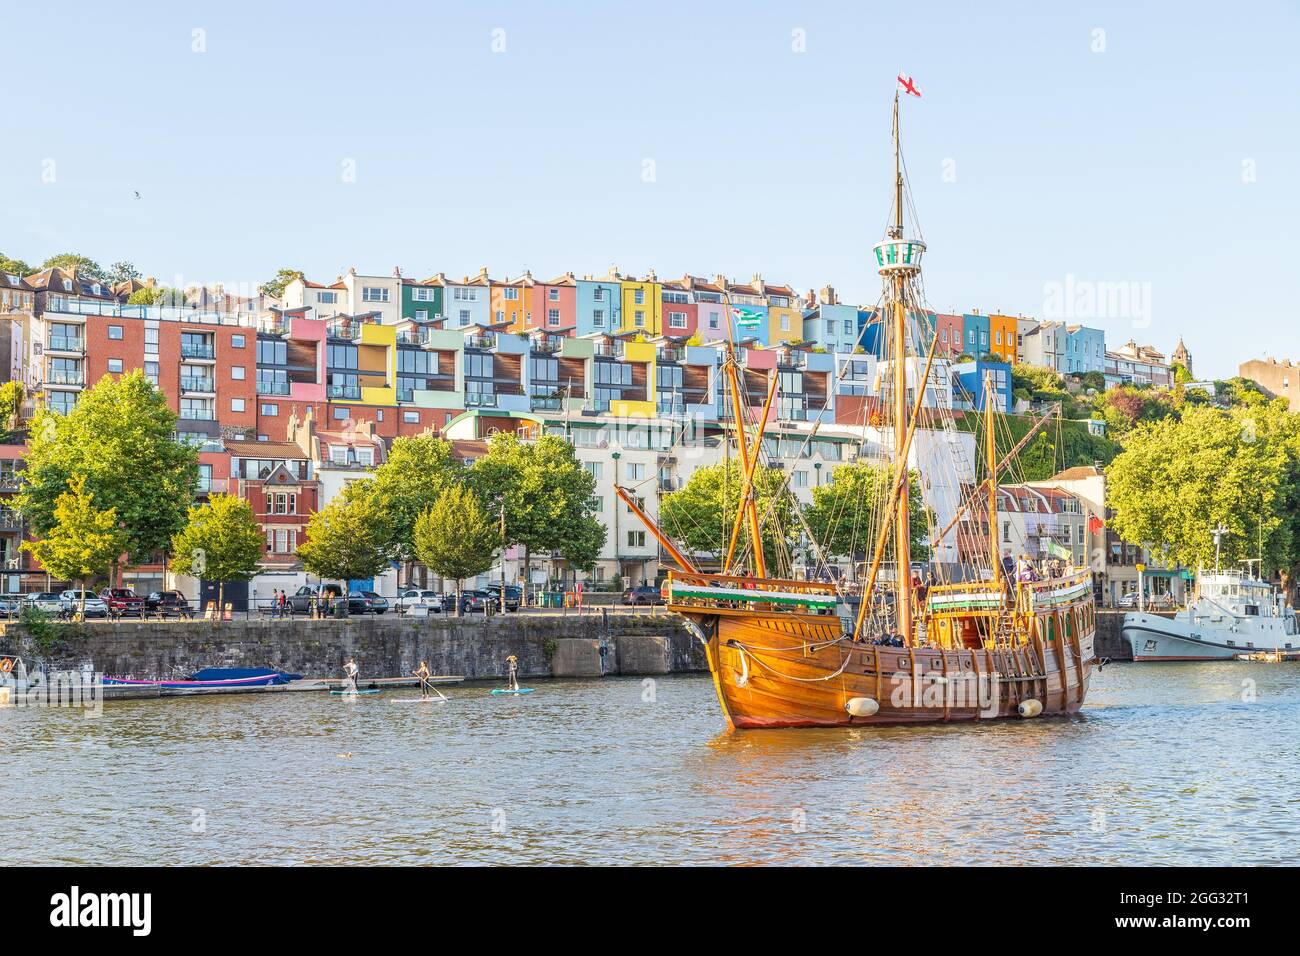 BRISTOL, UK - 18TH AUG 2021: A large boat and colourful buildings and boats along the Bristol Waterfront. Some people can be seen. Stock Photo